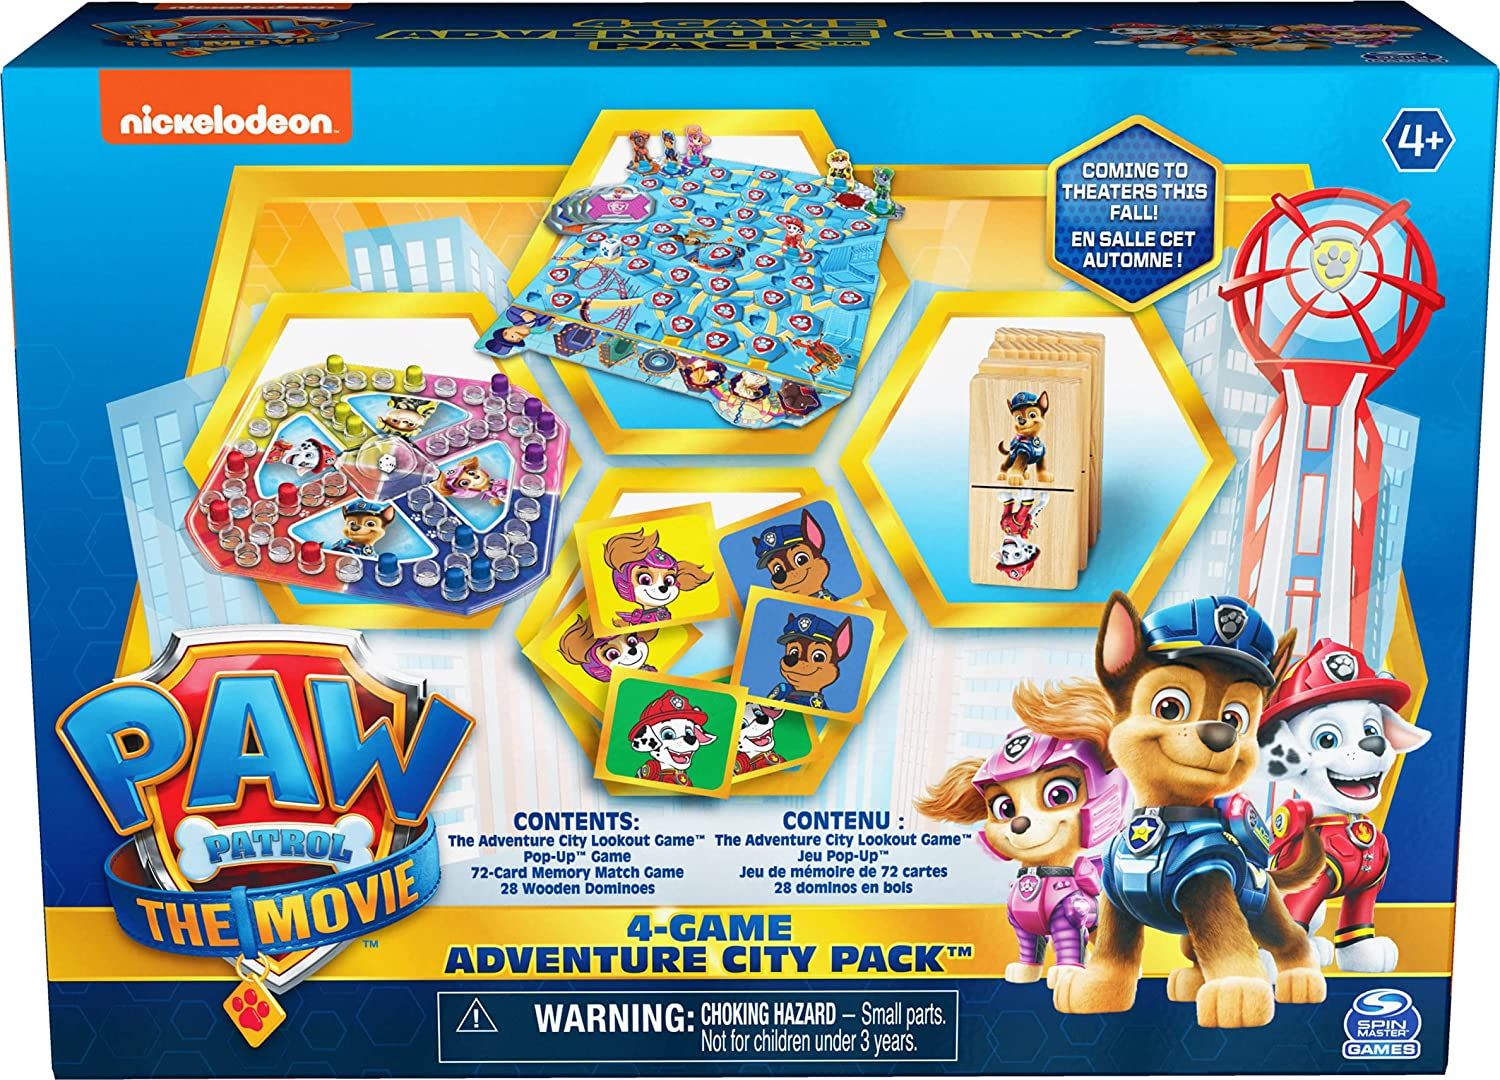 Nickelodeon Paw Patrol Pop up Game Novelty Character Toys for sale online